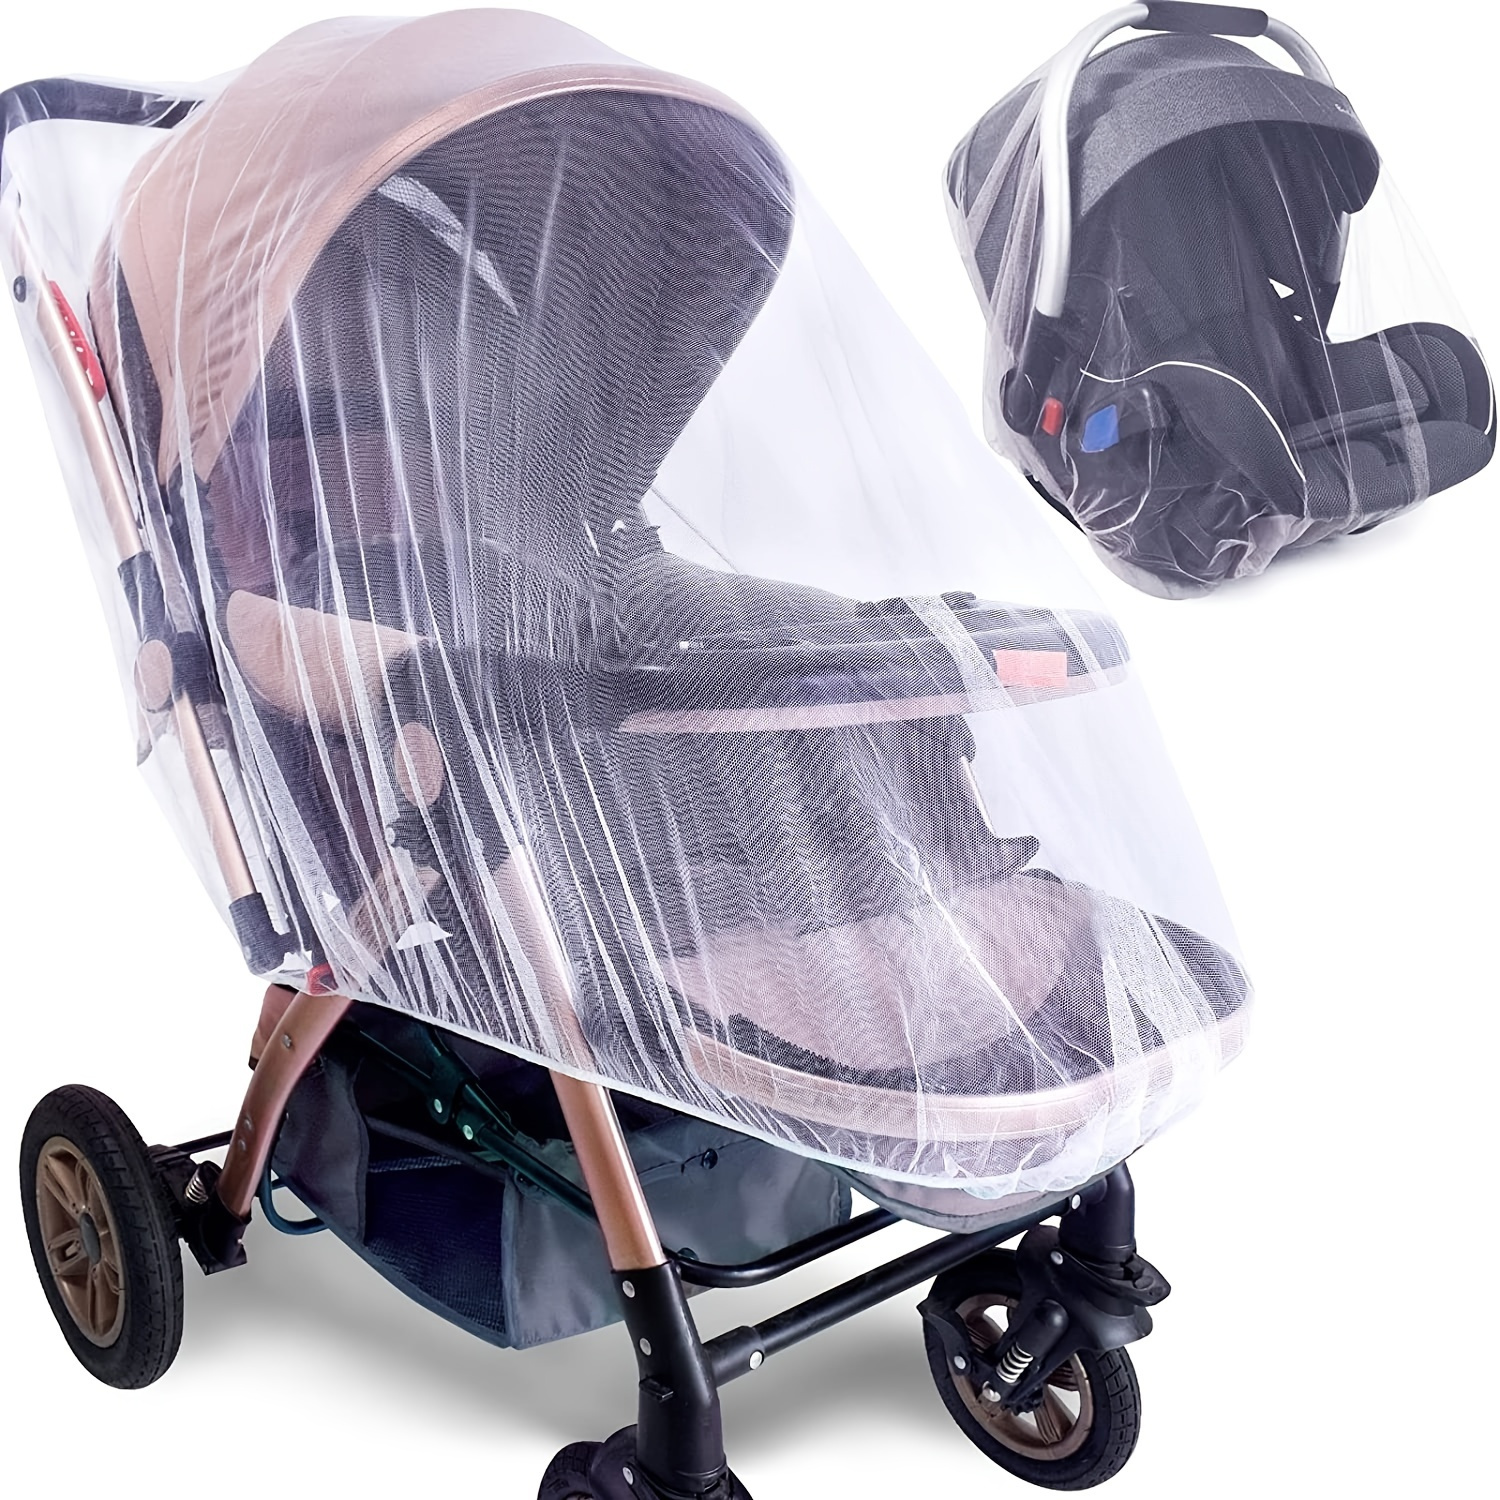 

Mosquito Net For Stroller - Durable Baby Stroller Mosquito Net - Perfect Bug Net For Strollers, Bassinets, Cradles, Playards, Pack N Plays And Portable Mini Crib (white)